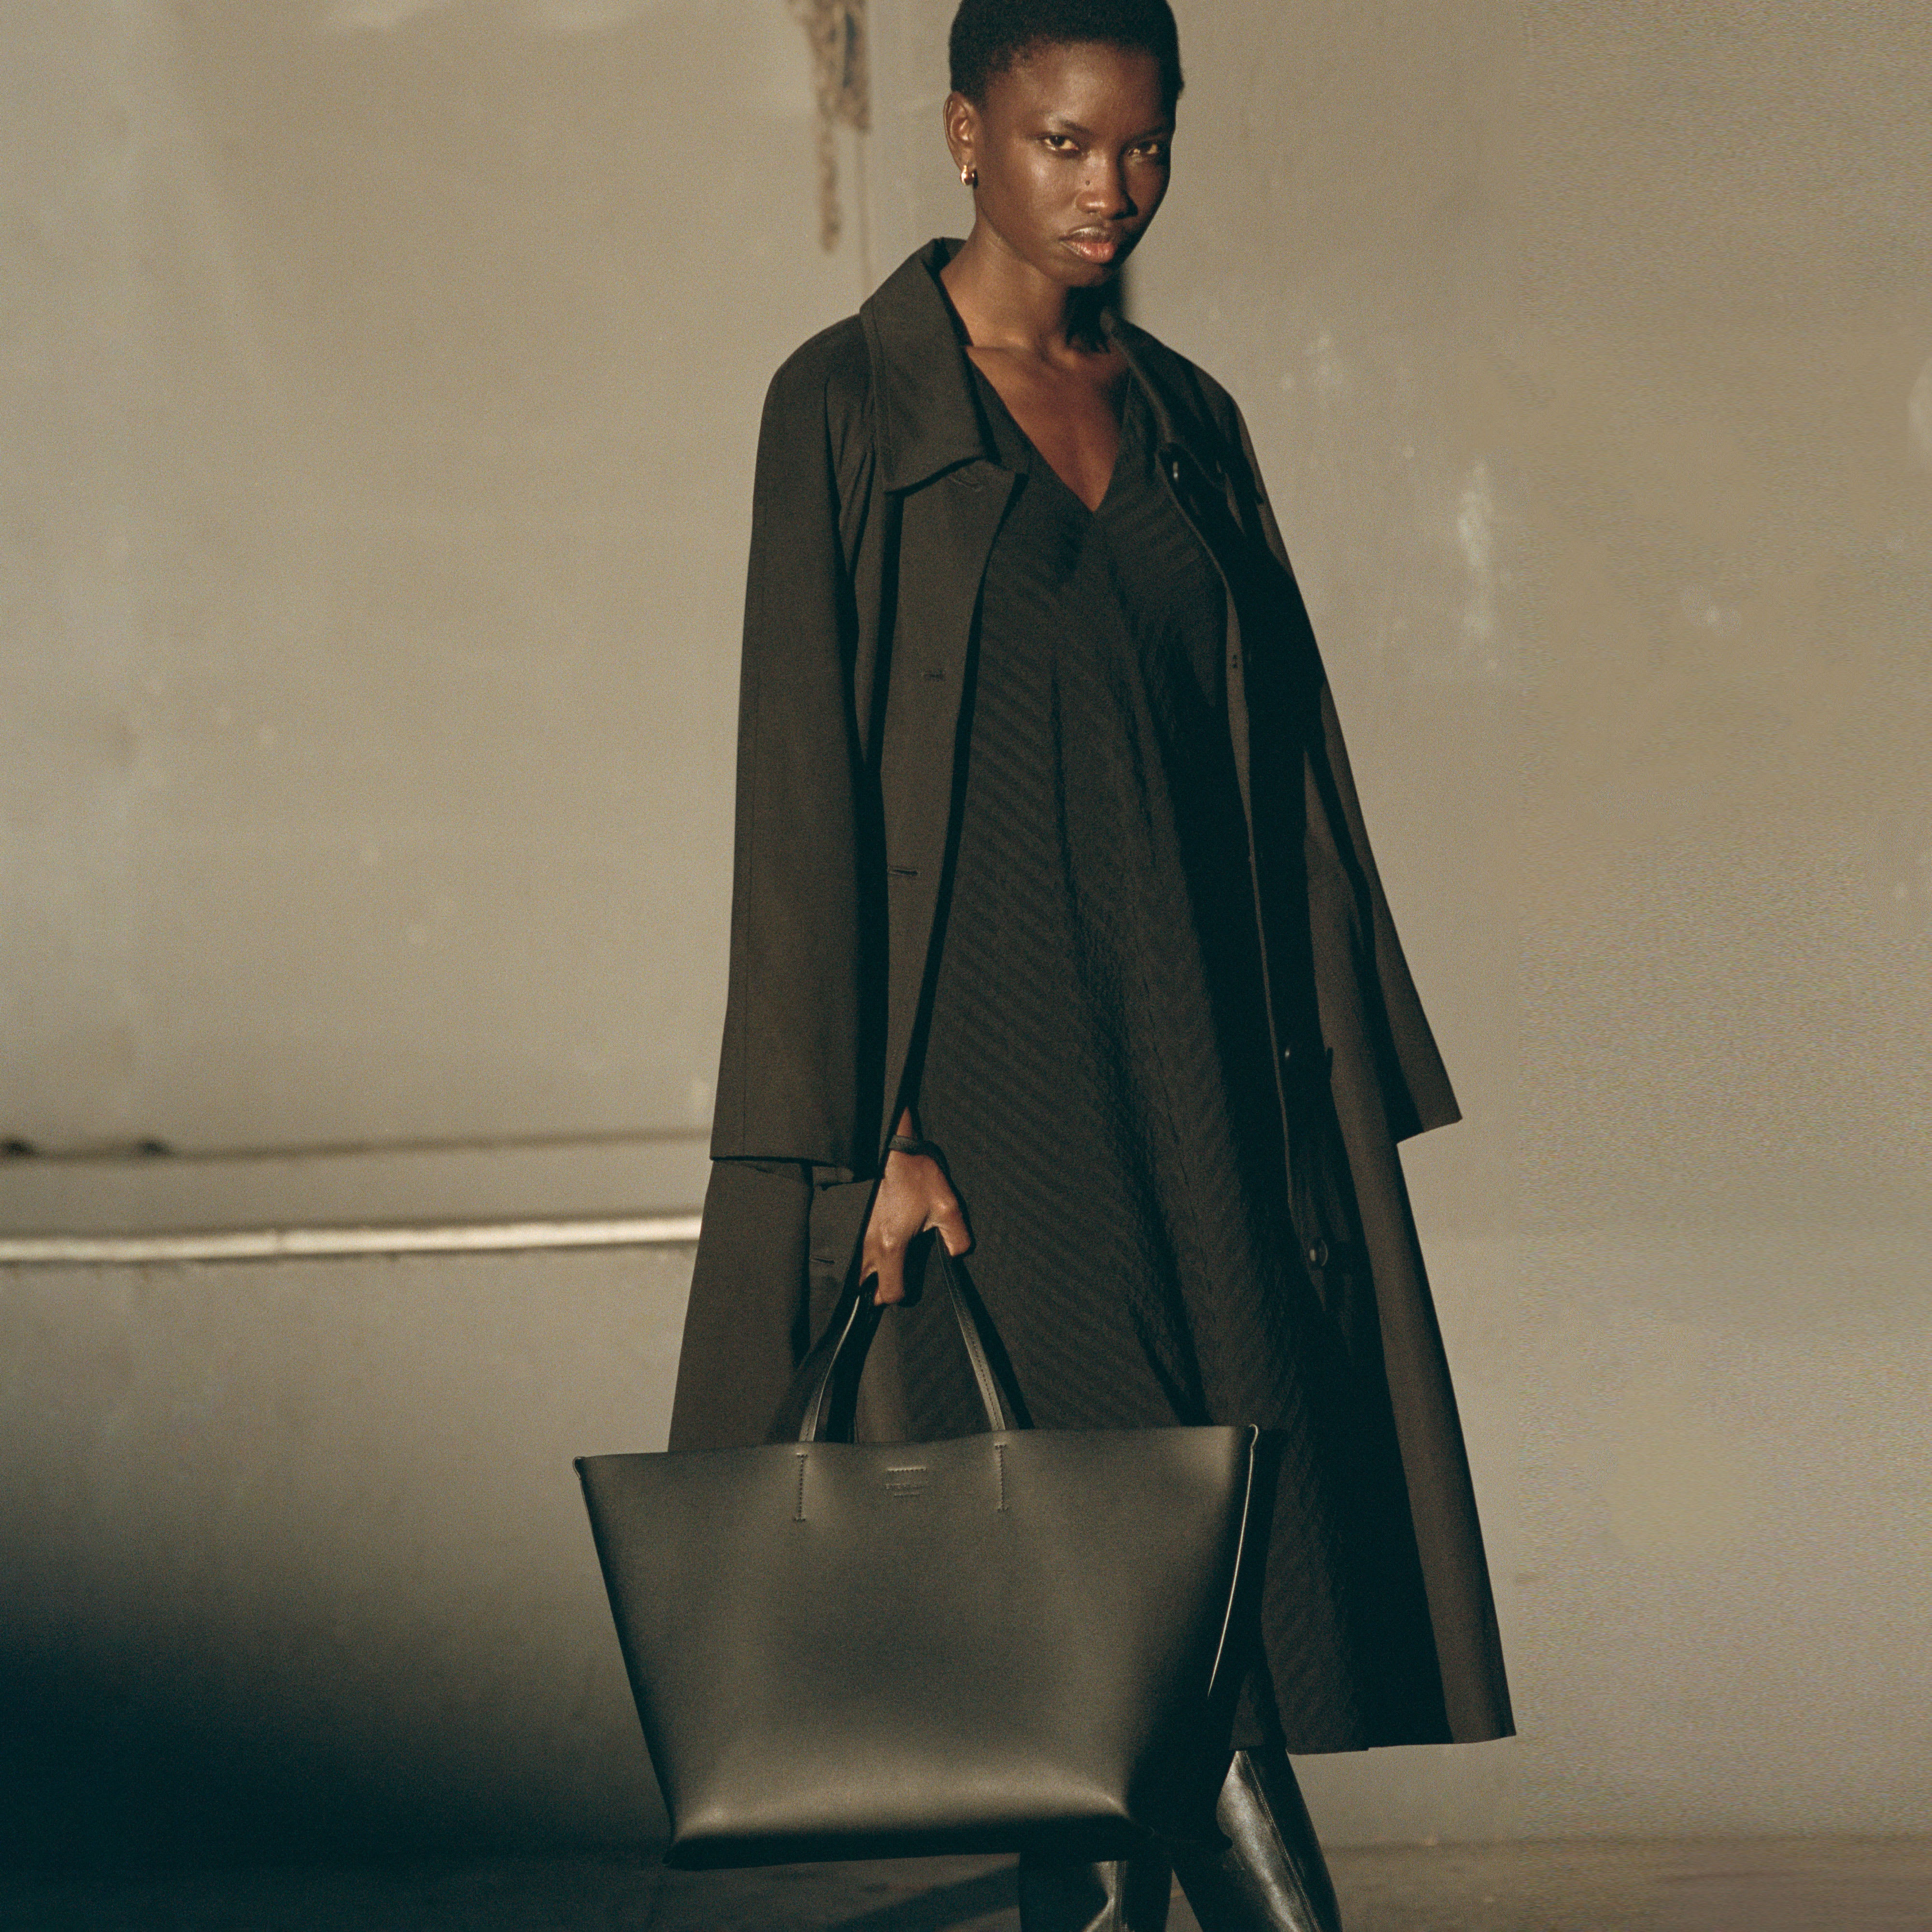 The Recycled Nylon Tote Black – Everlane